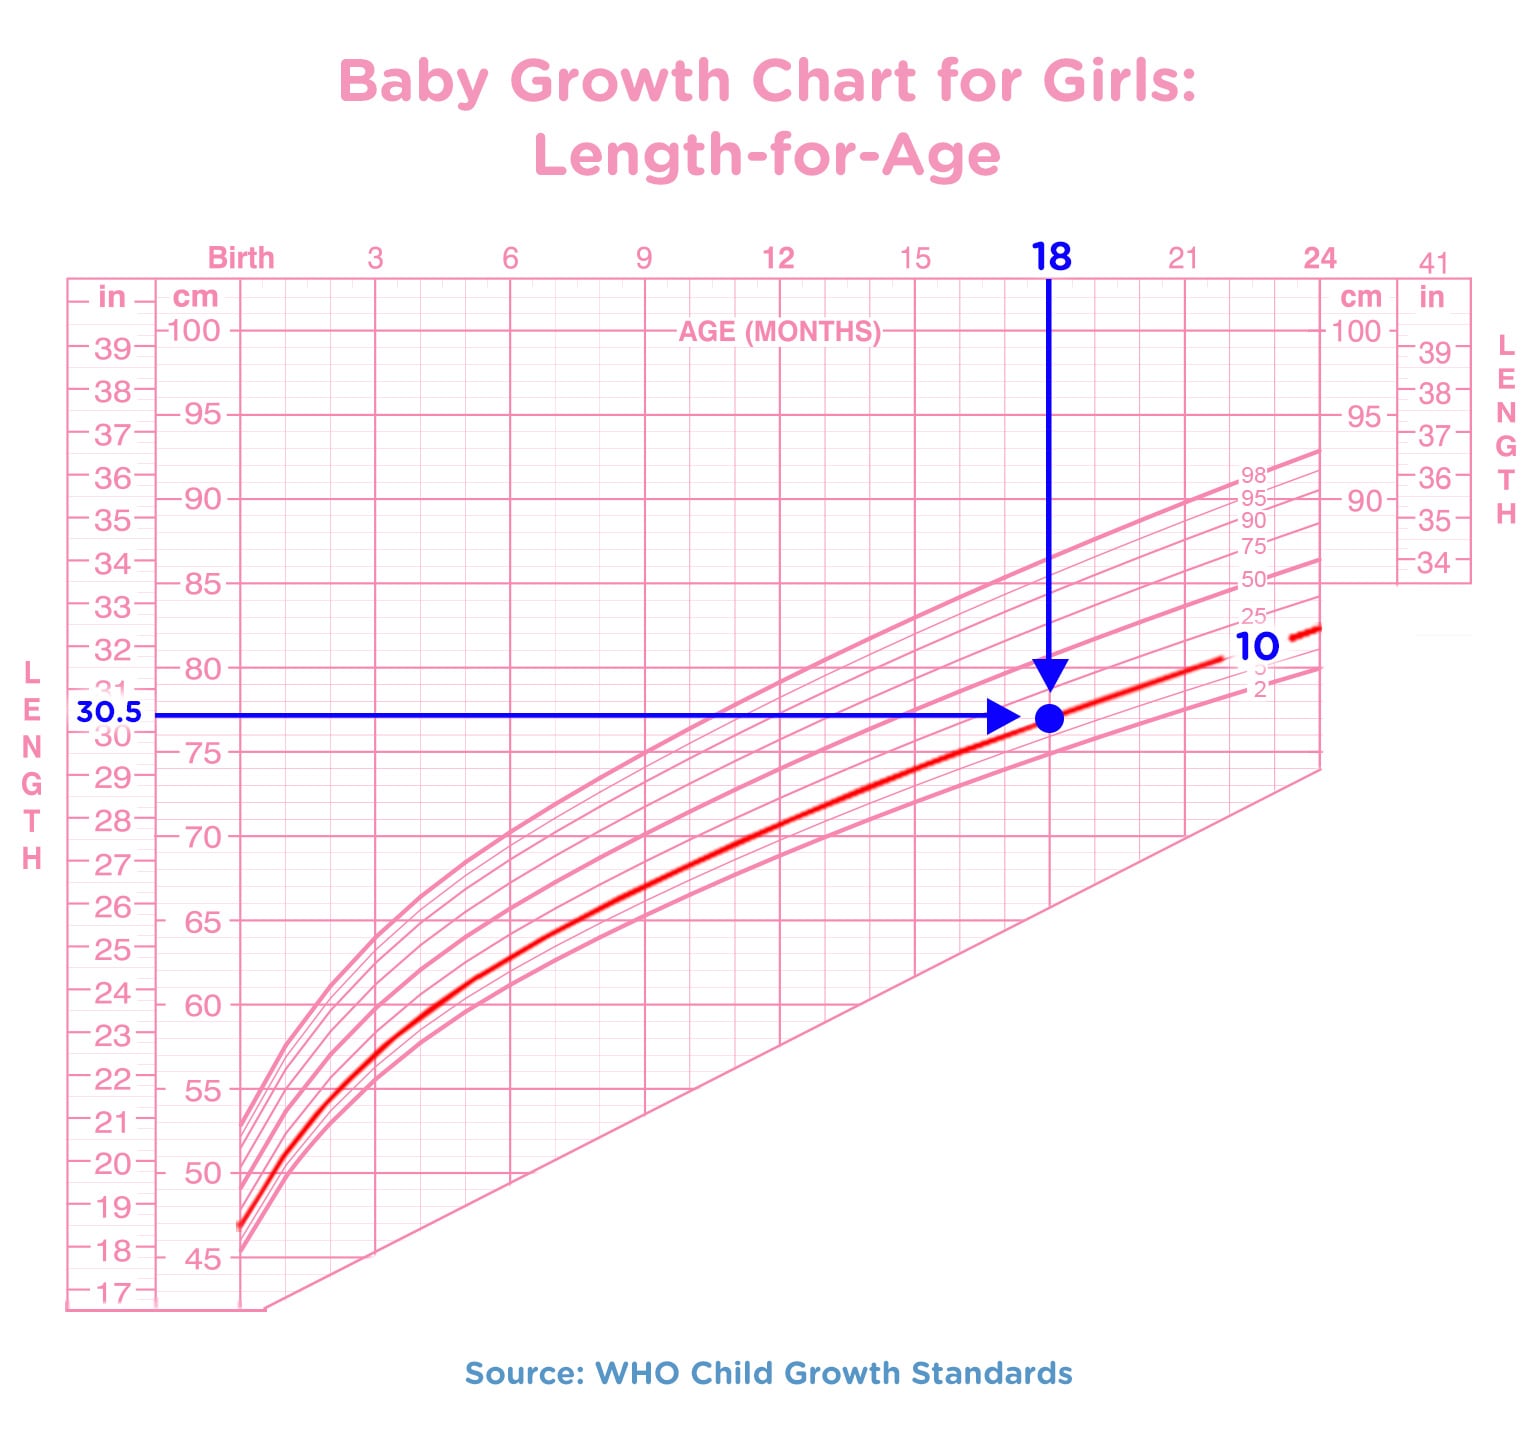 Pregnancy Growth Chart For